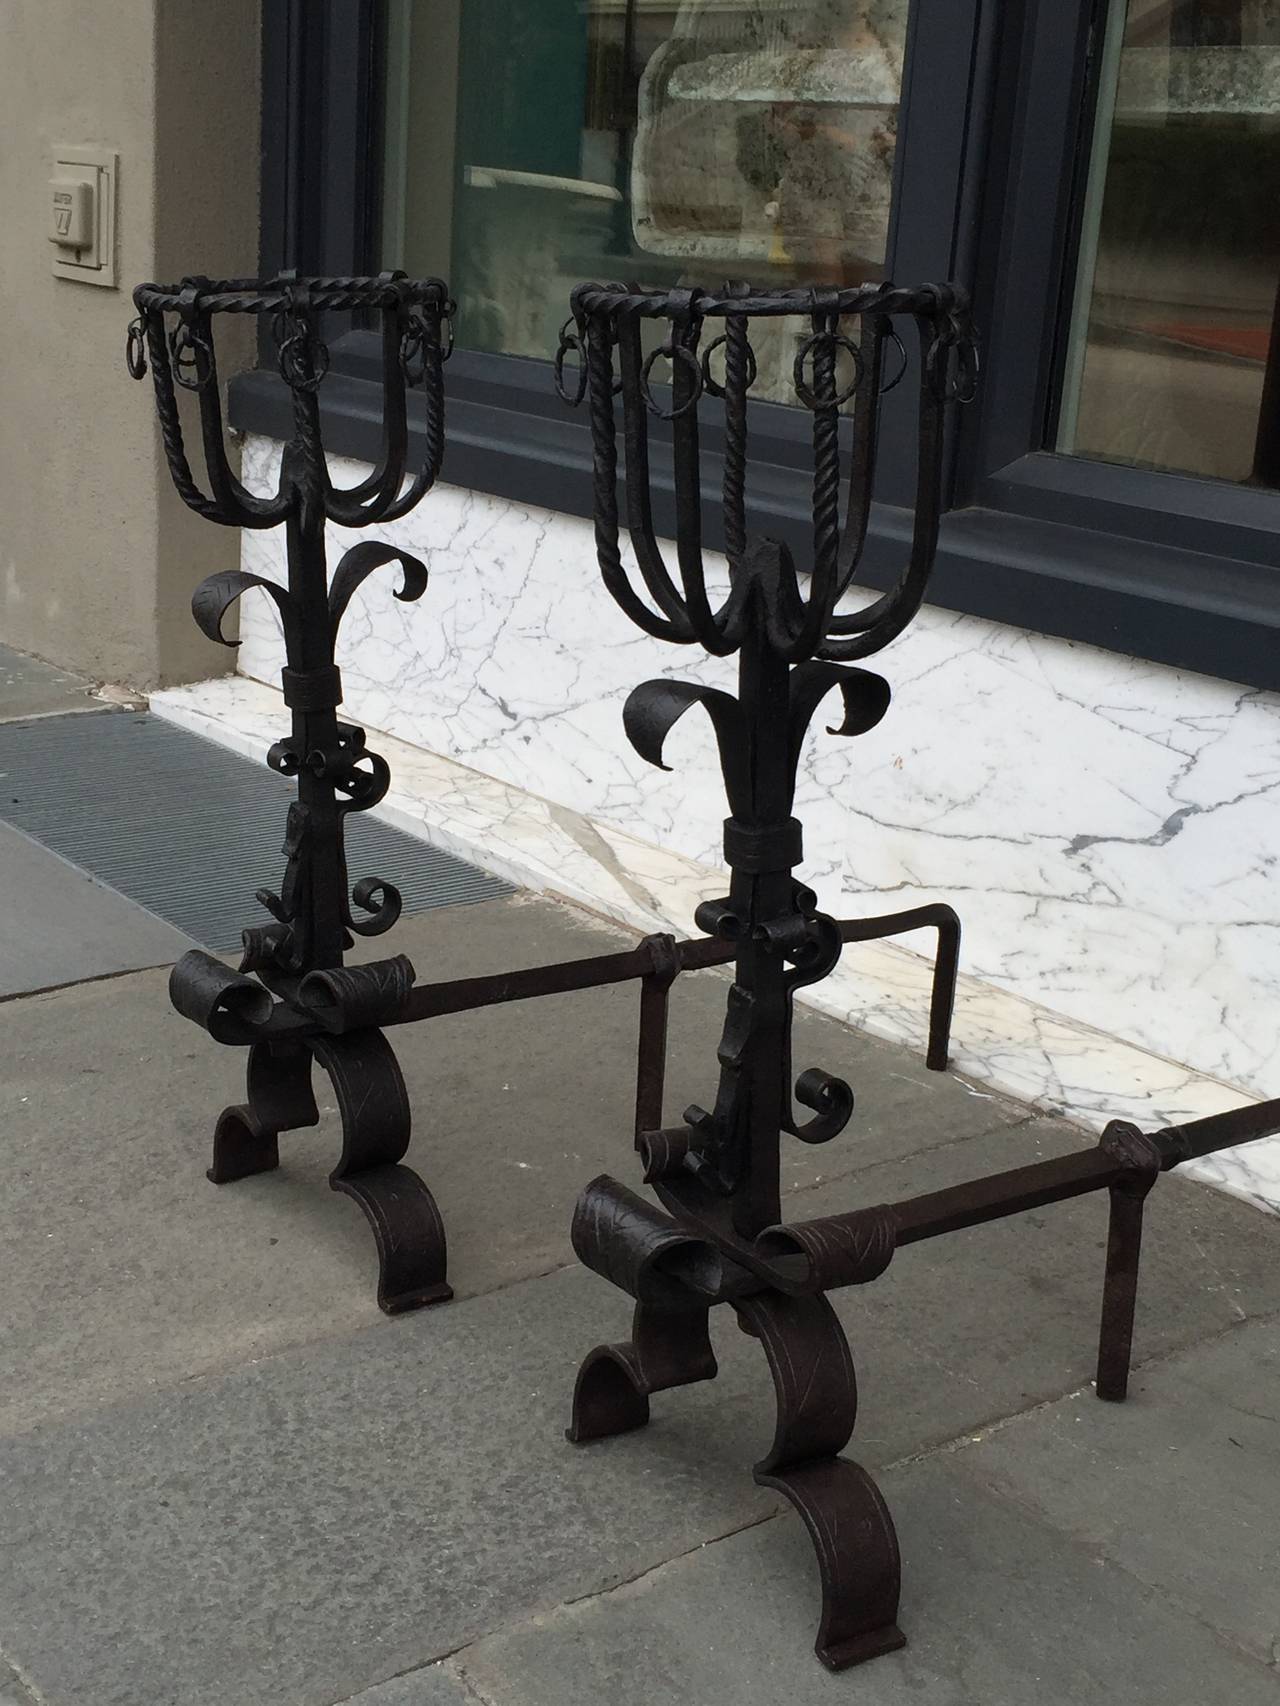 Pair of ornatlely detailed continental andirons with scrolled iron work around the feet and basket tops circa 1840 